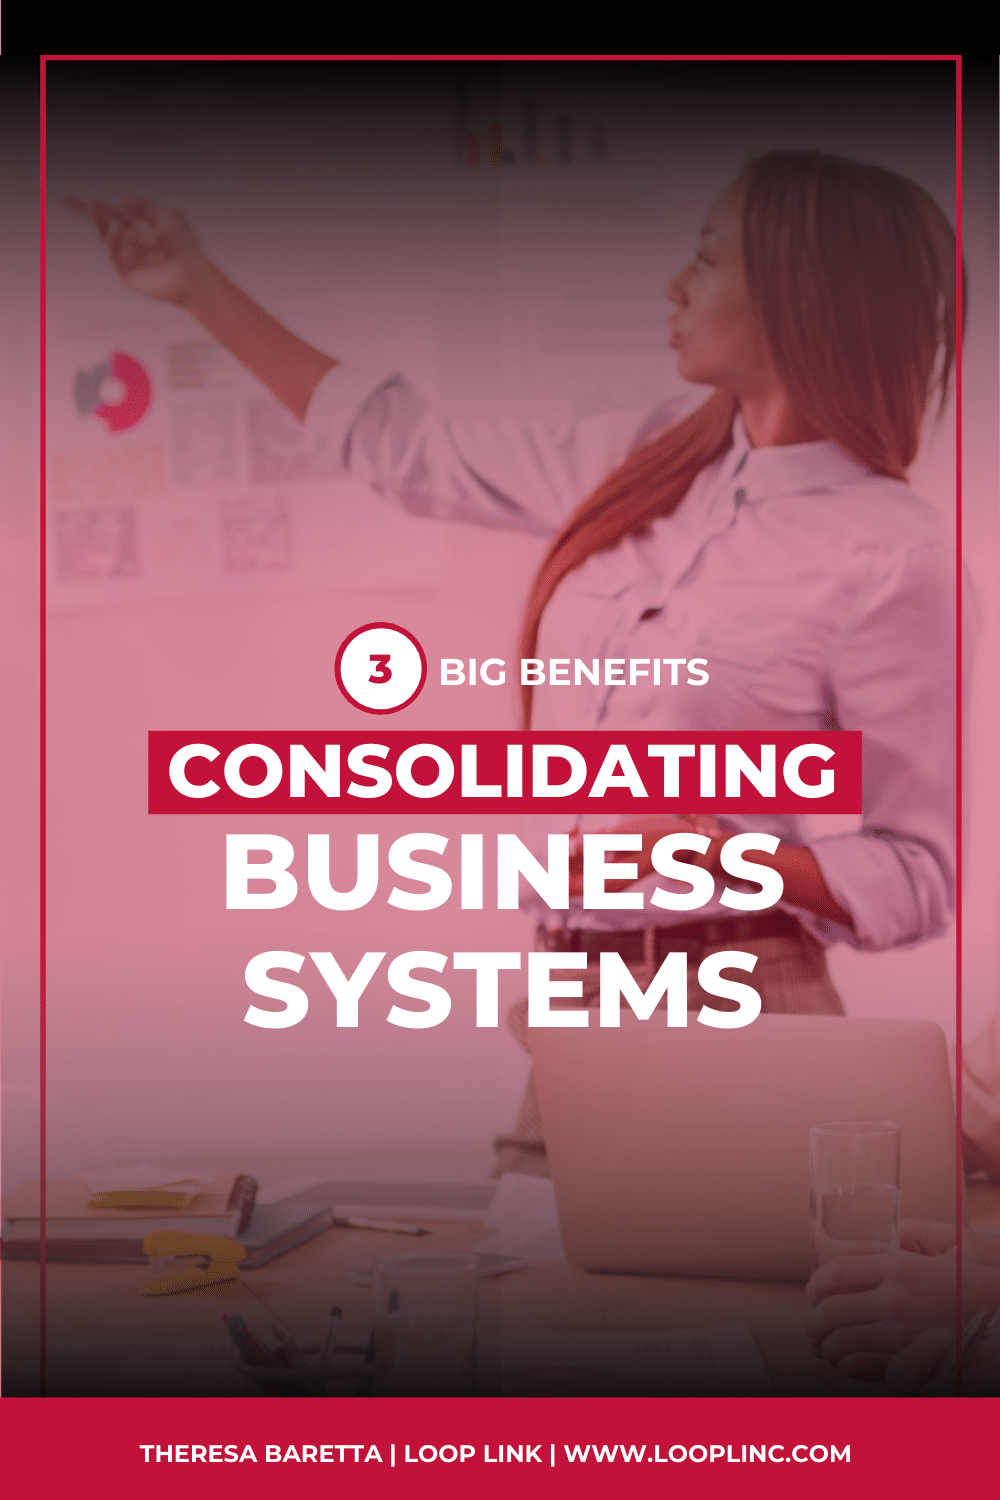 Big 3 Benefits to Consolidating Your Business Systems